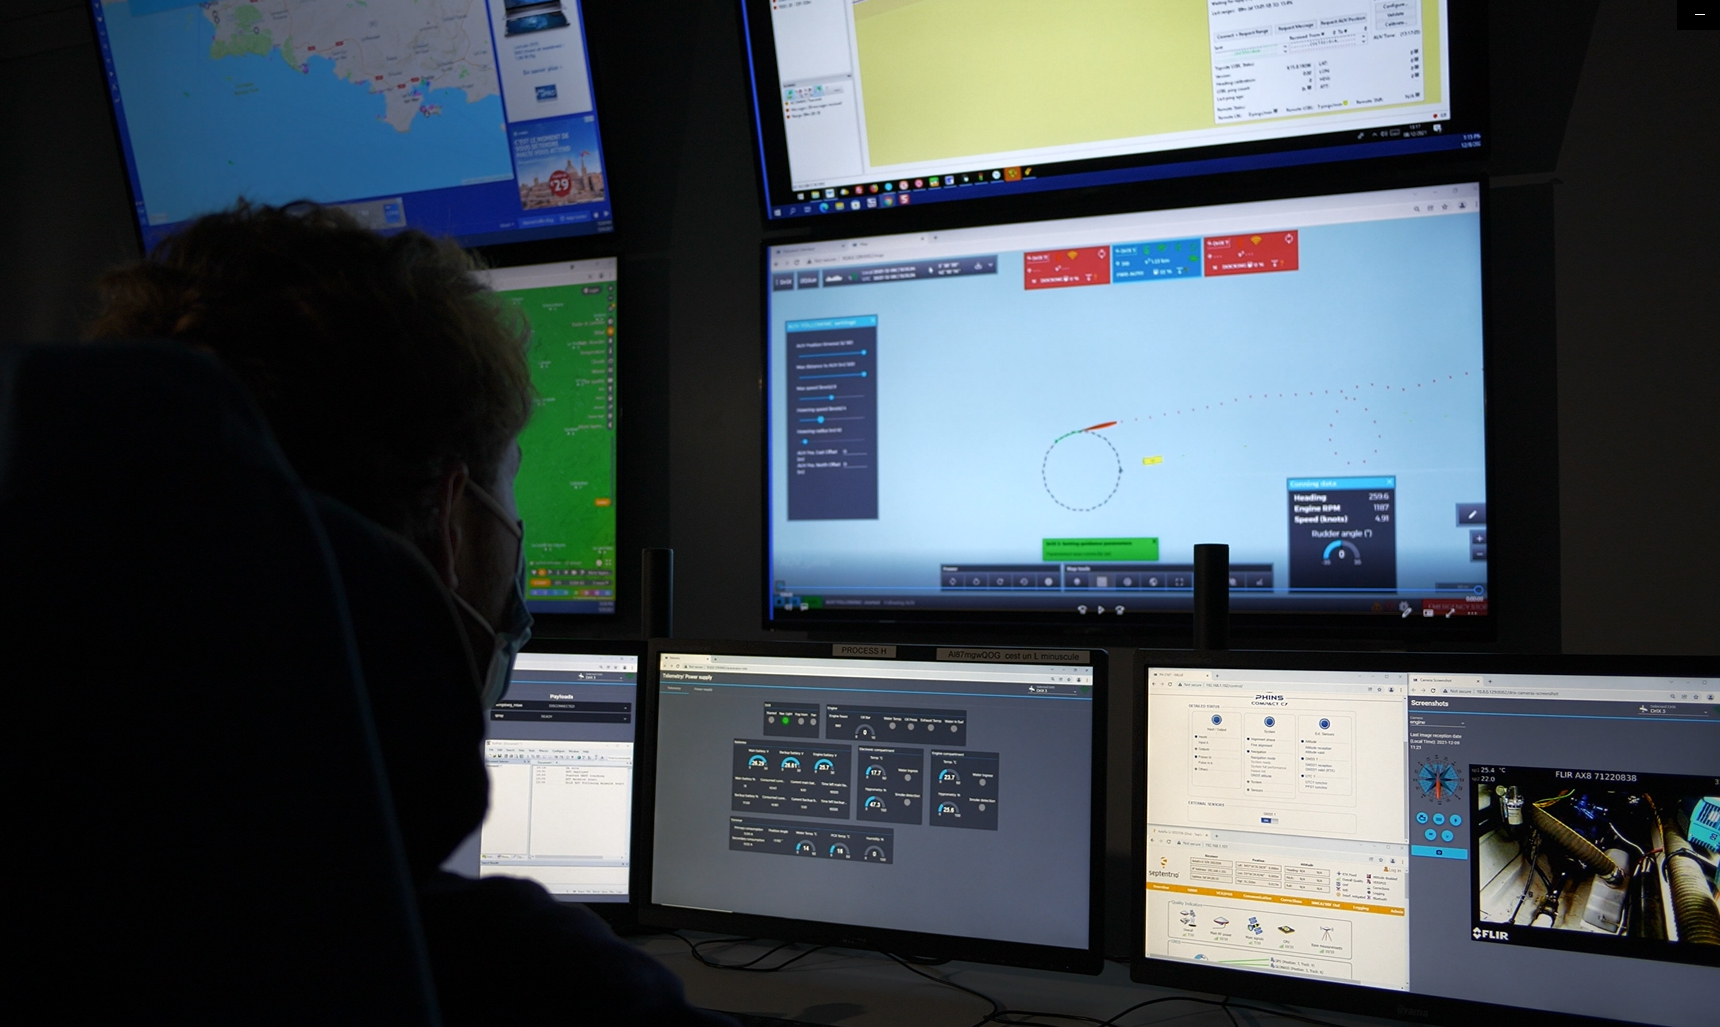 iXblue surveyors supervised the operation from their Onshore Control Center